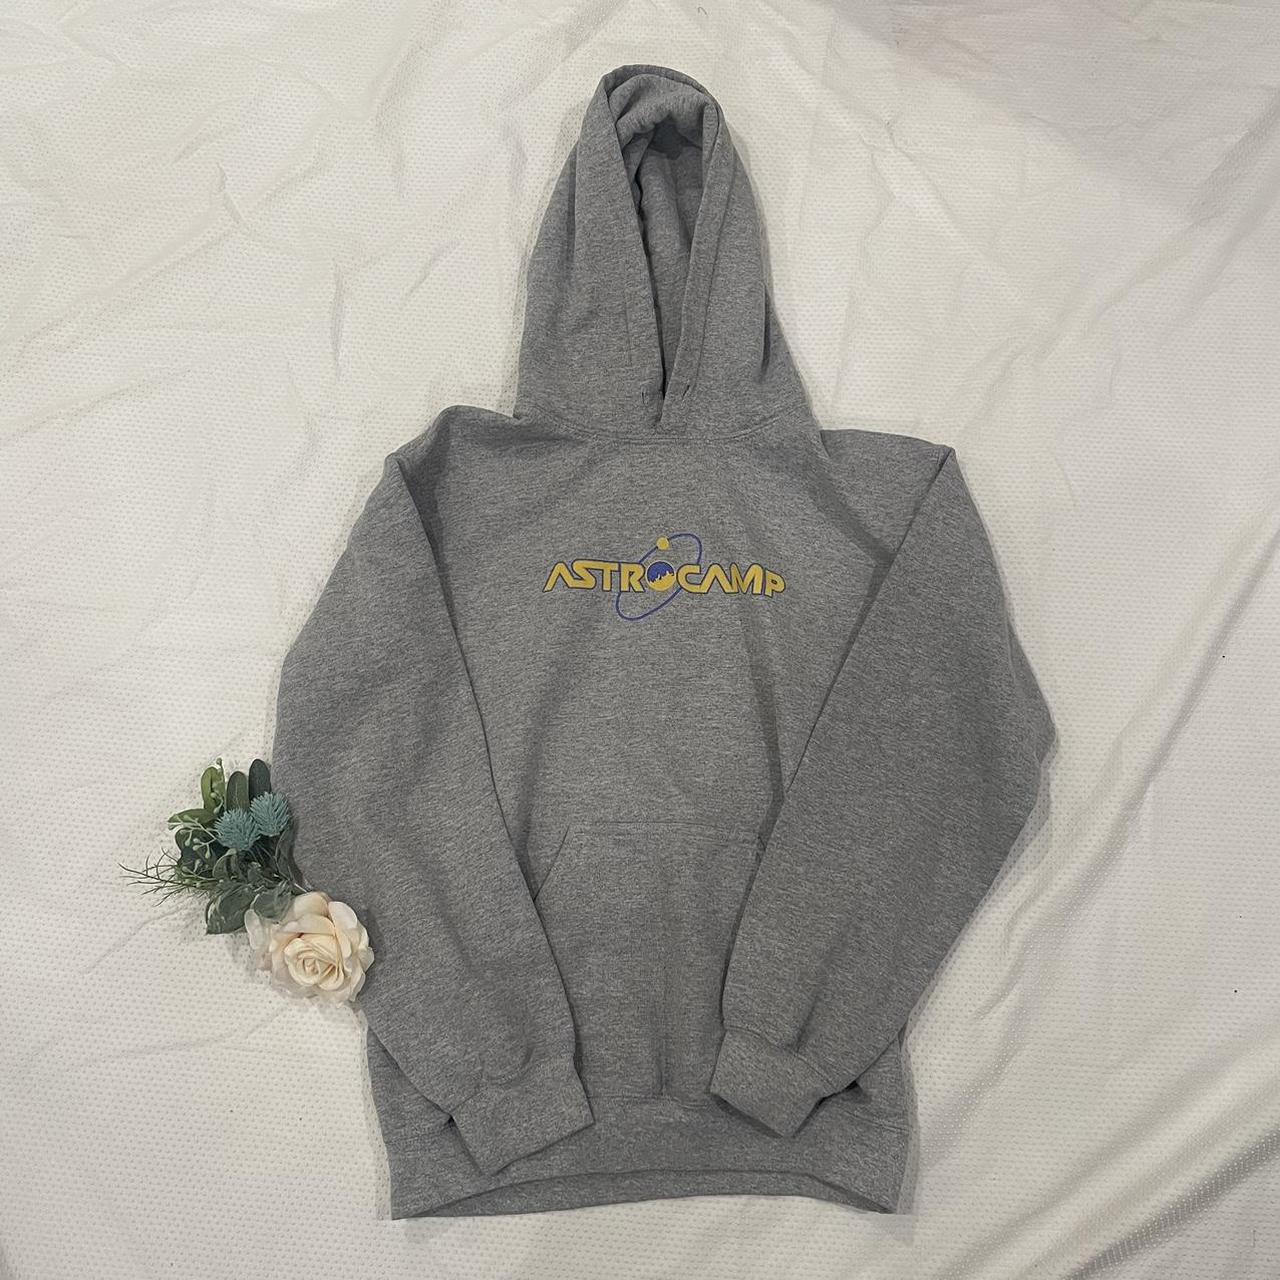 Astro Camp Graphic Hoodie (Small) . This hoodie is... - Depop